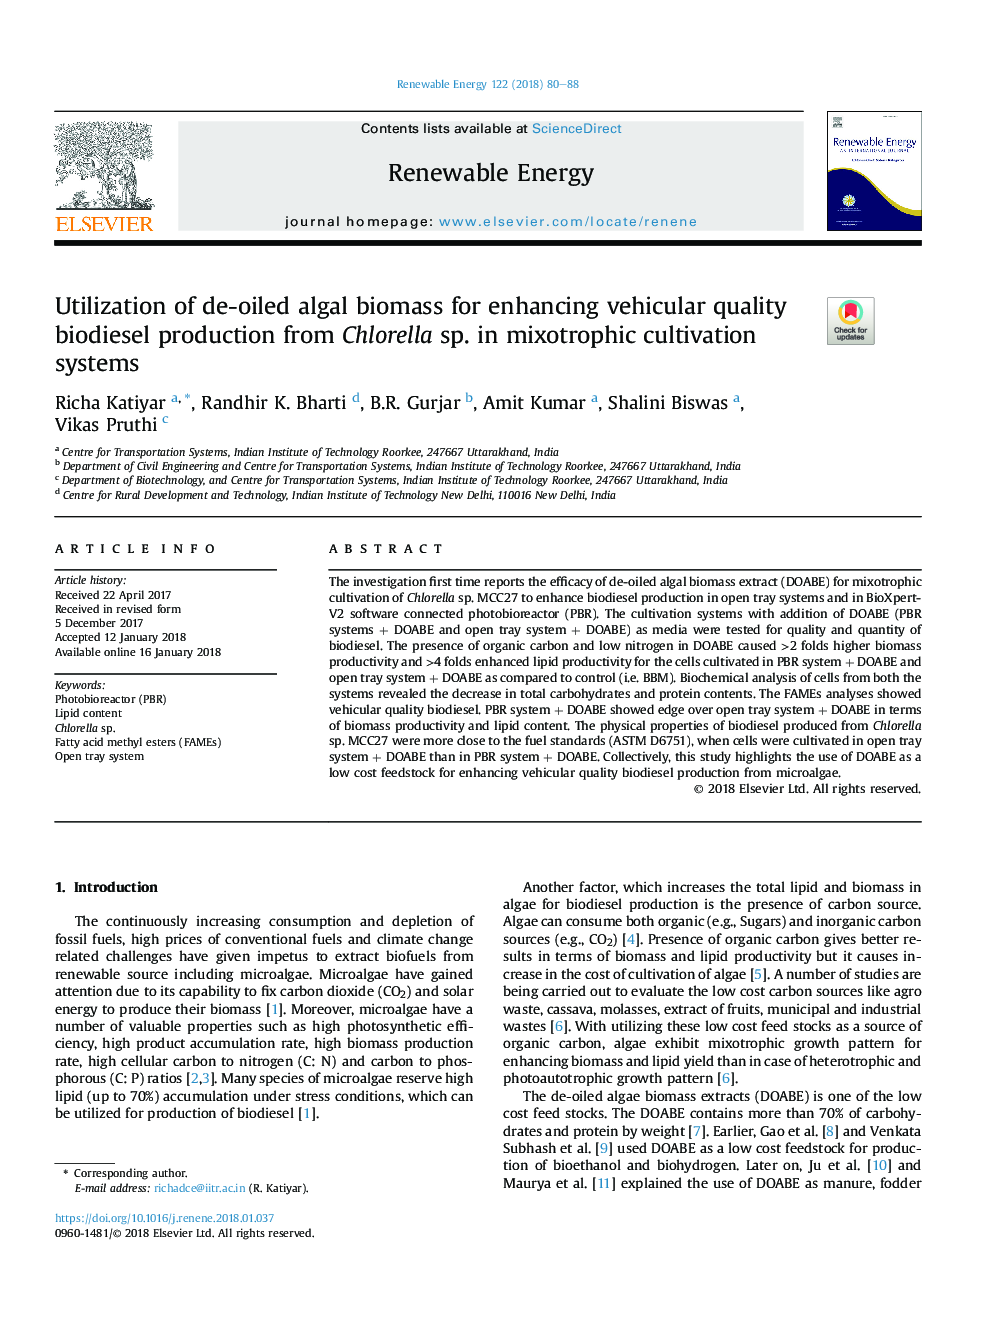 Utilization of de-oiled algal biomass for enhancing vehicular quality biodiesel production from Chlorella sp. in mixotrophic cultivation systems